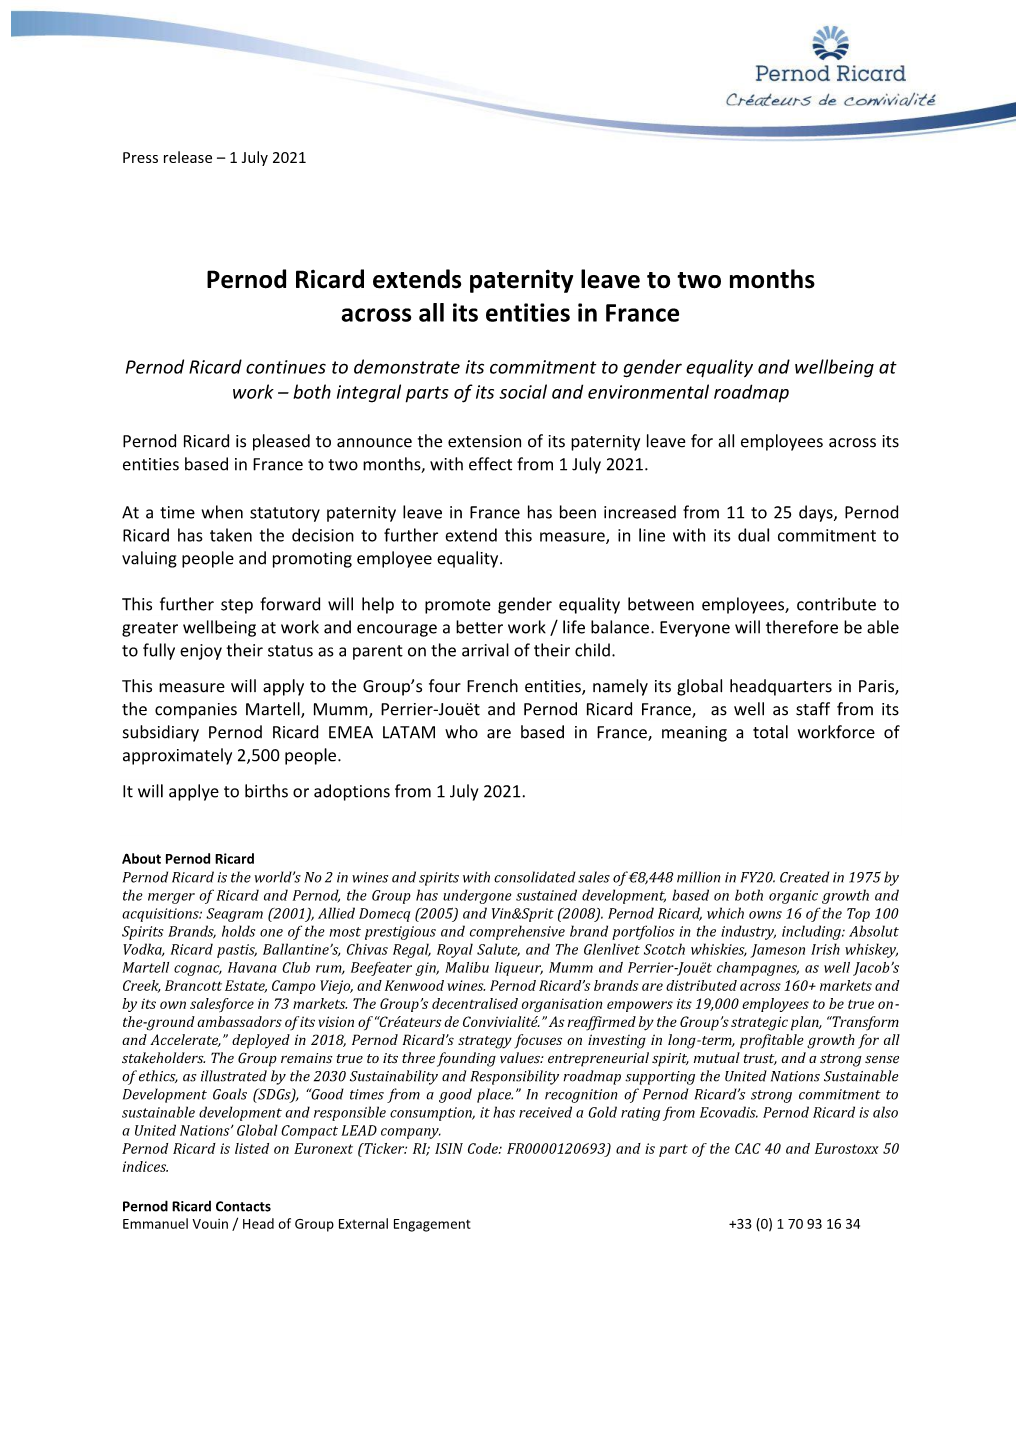 Pernod Ricard Extends Paternity Leave to Two Months Across All Its Entities in France